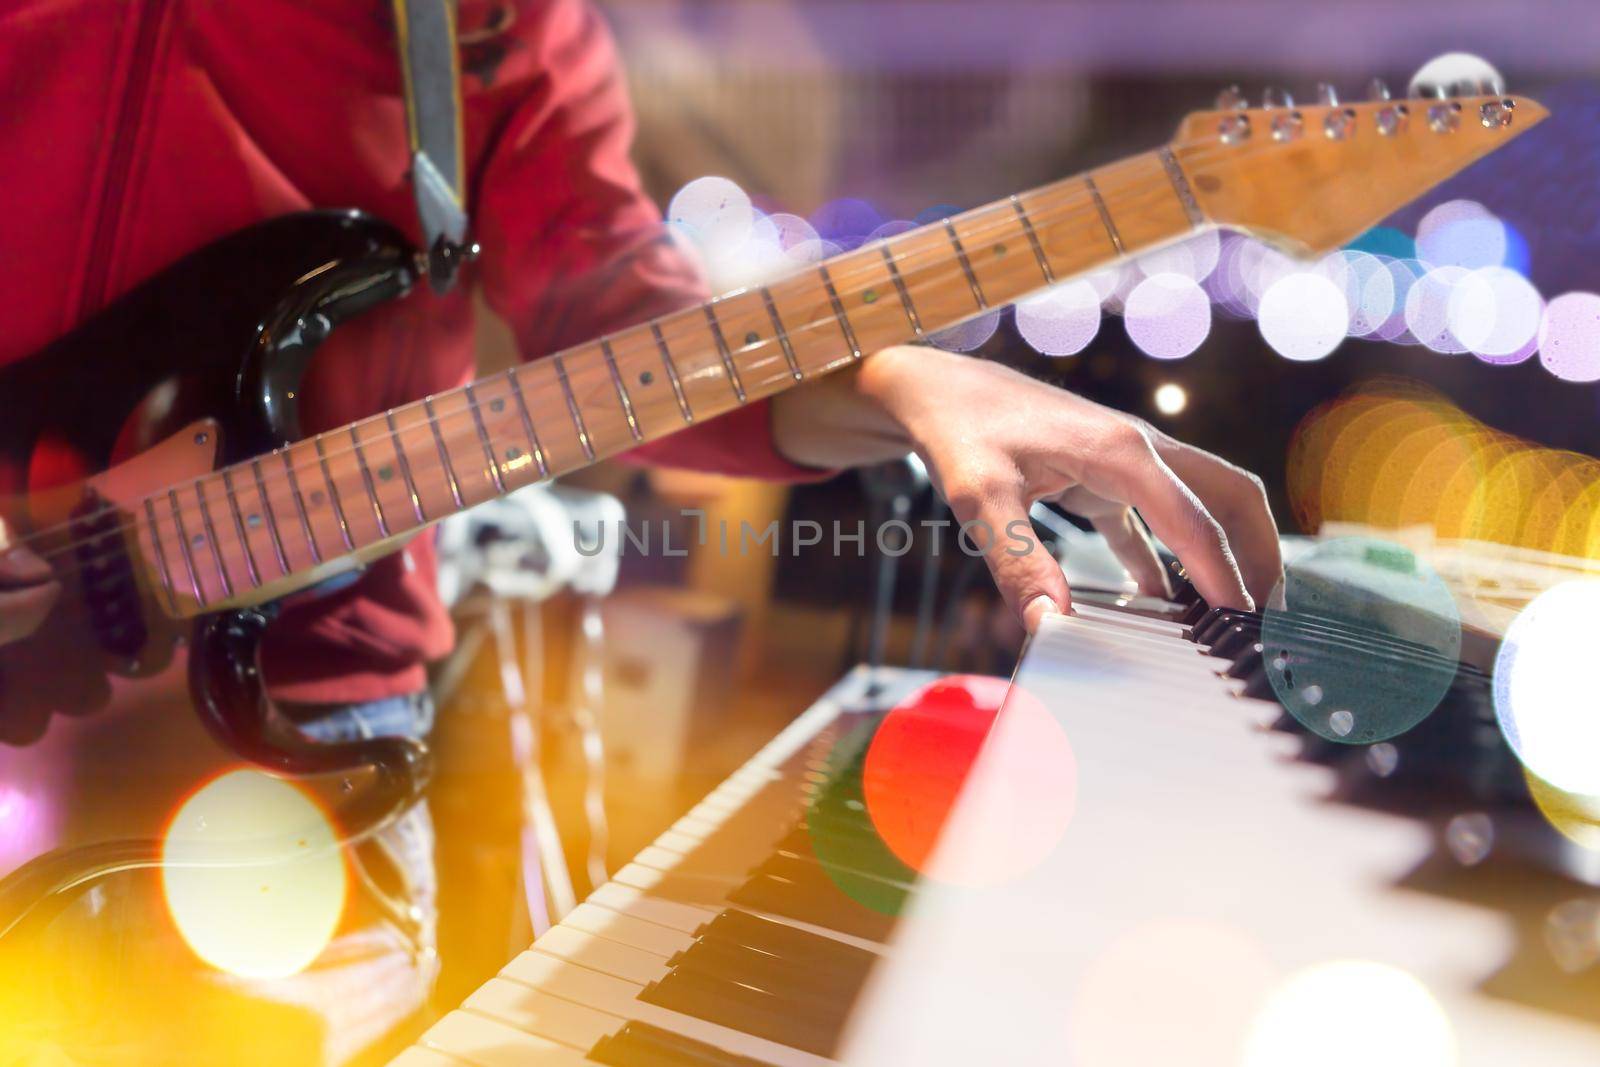 Guitarist on stage.Lifestyle of musicians by carloscastilla